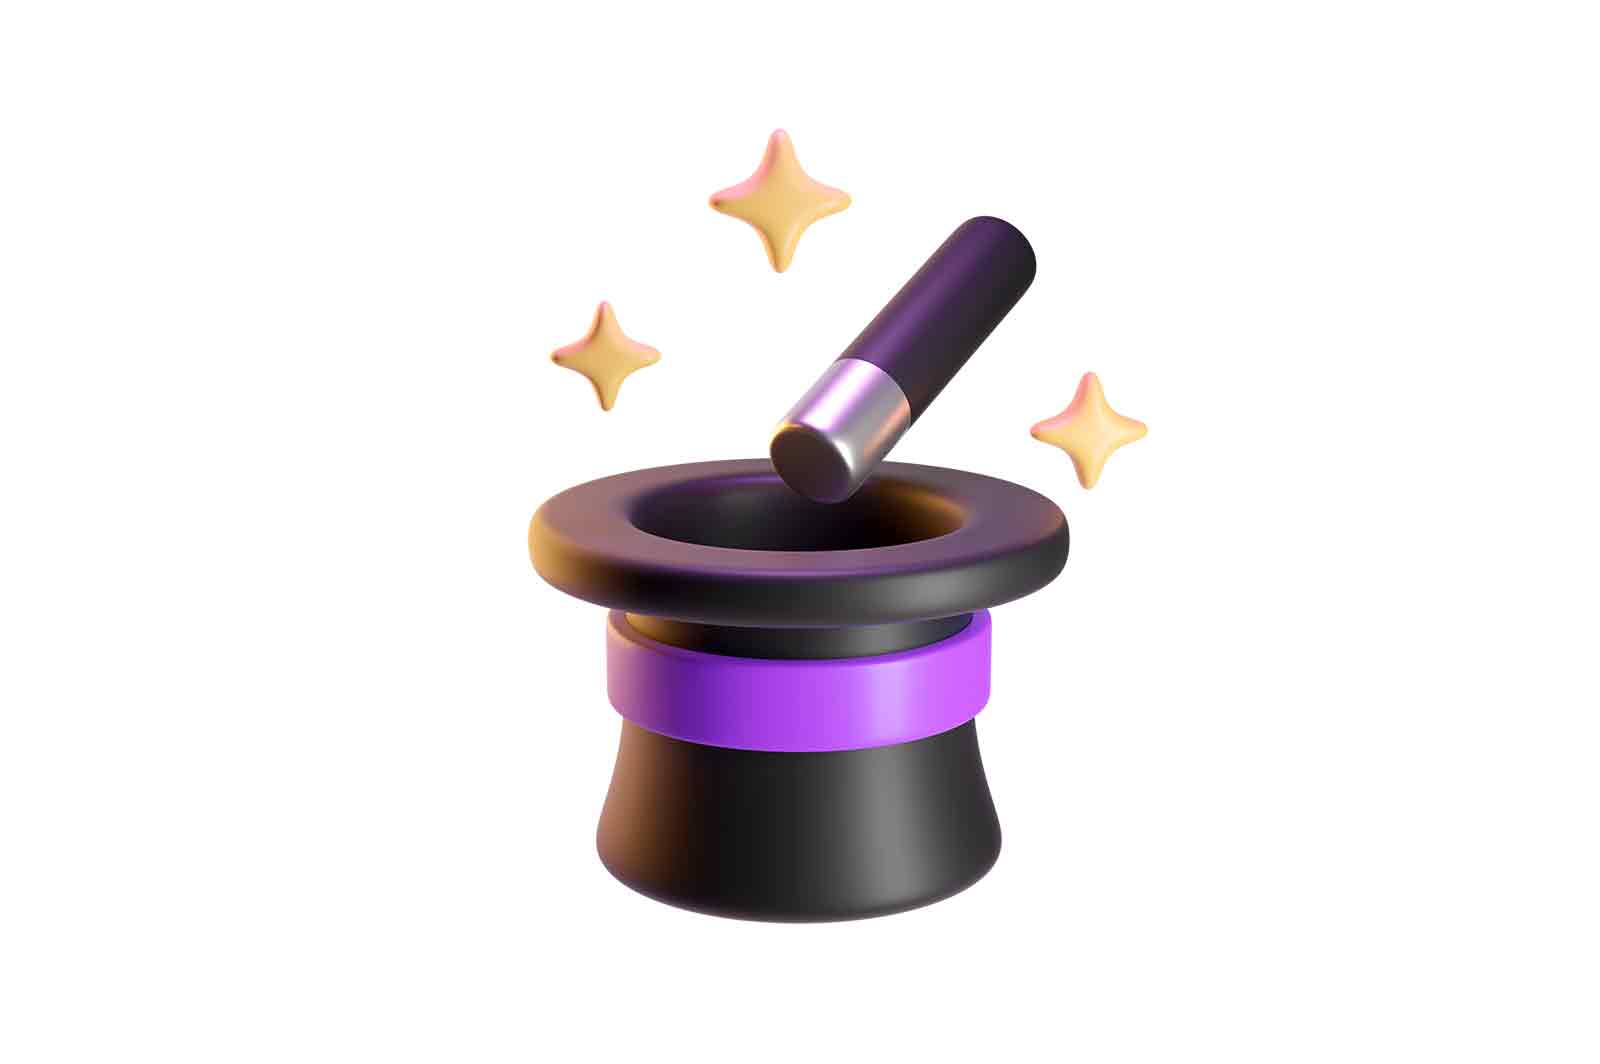 Magician’s hat and wand, 3D rendered illustration. A symbol of magic, mystery and fantasy.